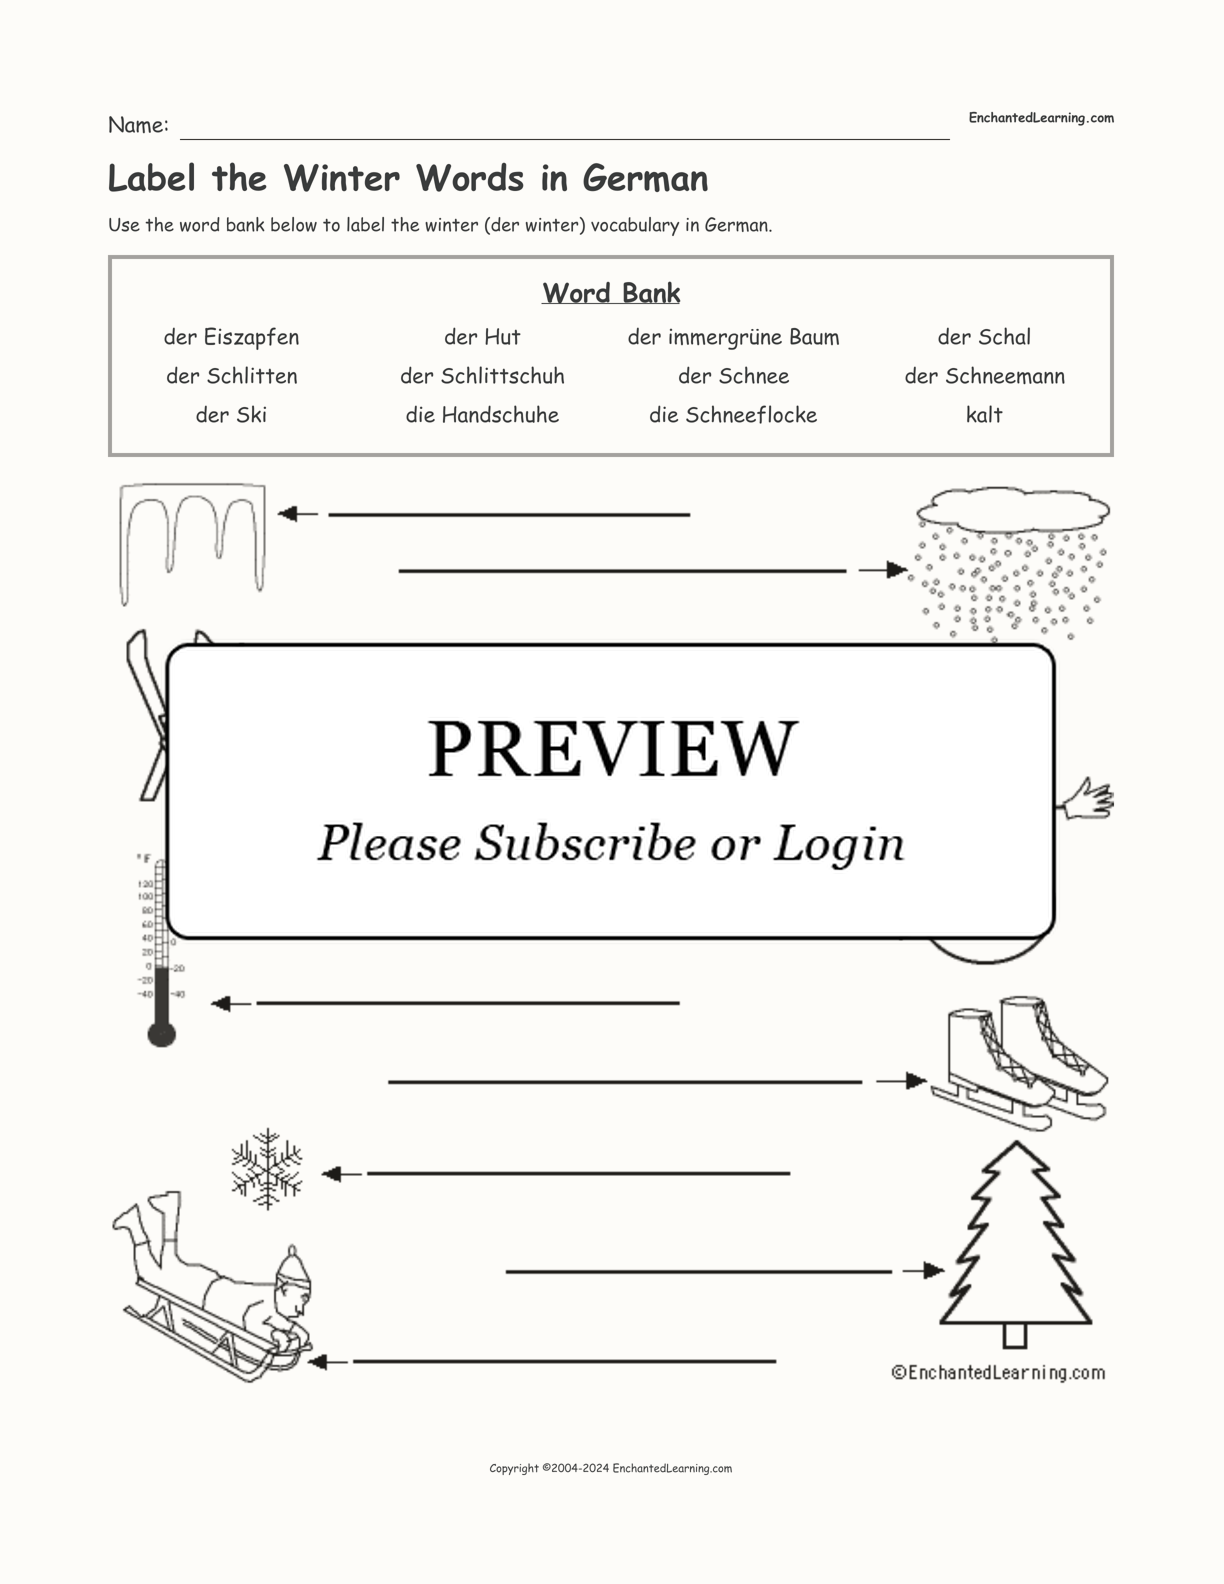 Label the Winter Words in German interactive worksheet page 1